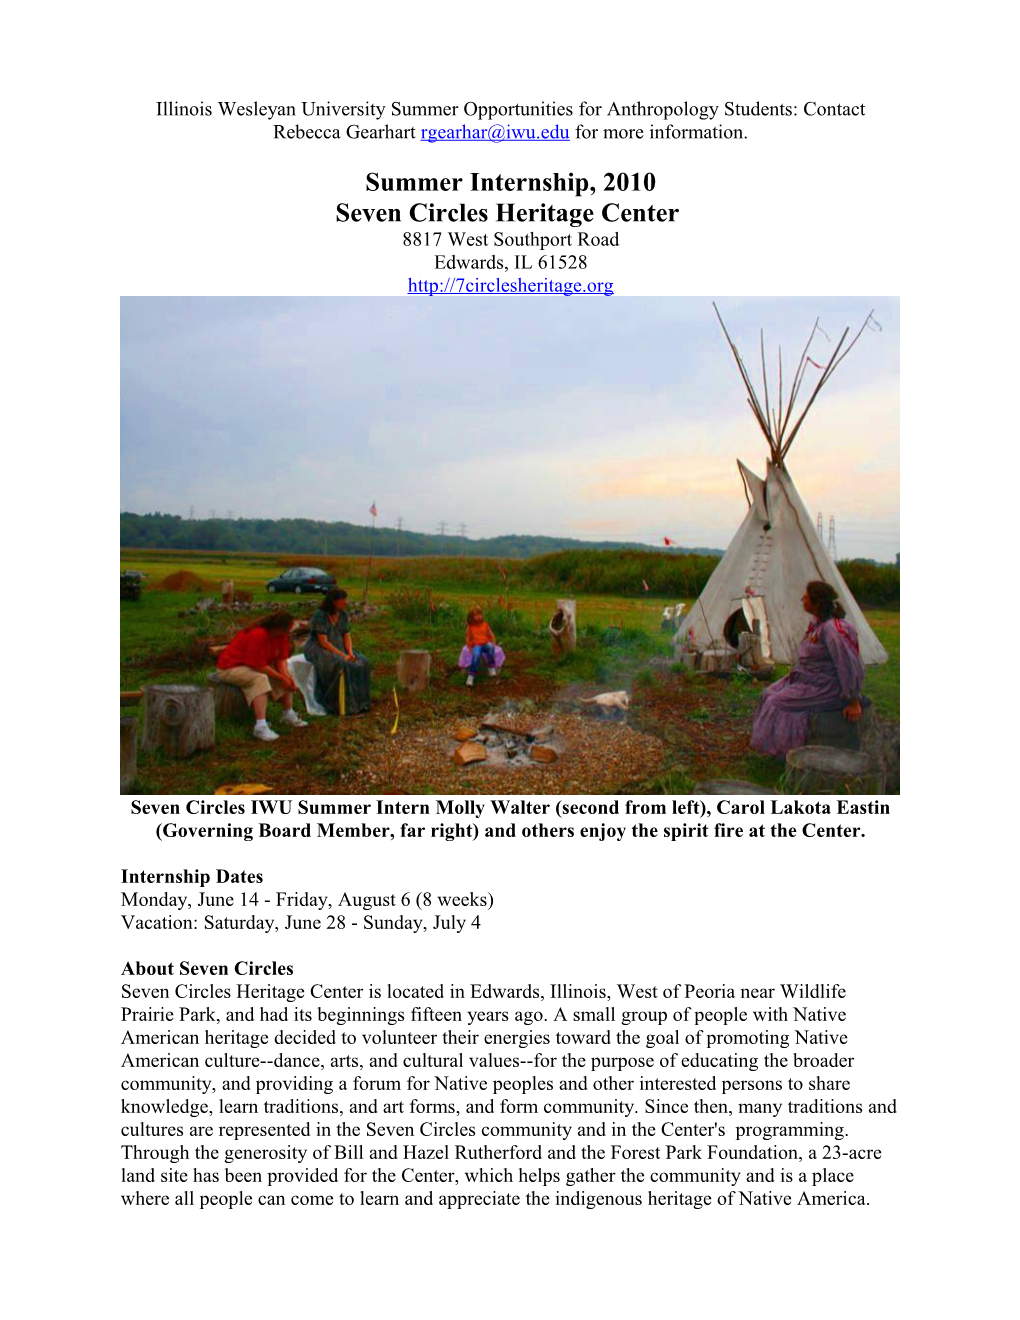 Illinois Wesleyan University Summer Opportunities for Anthropology Students: Contact Rebecca